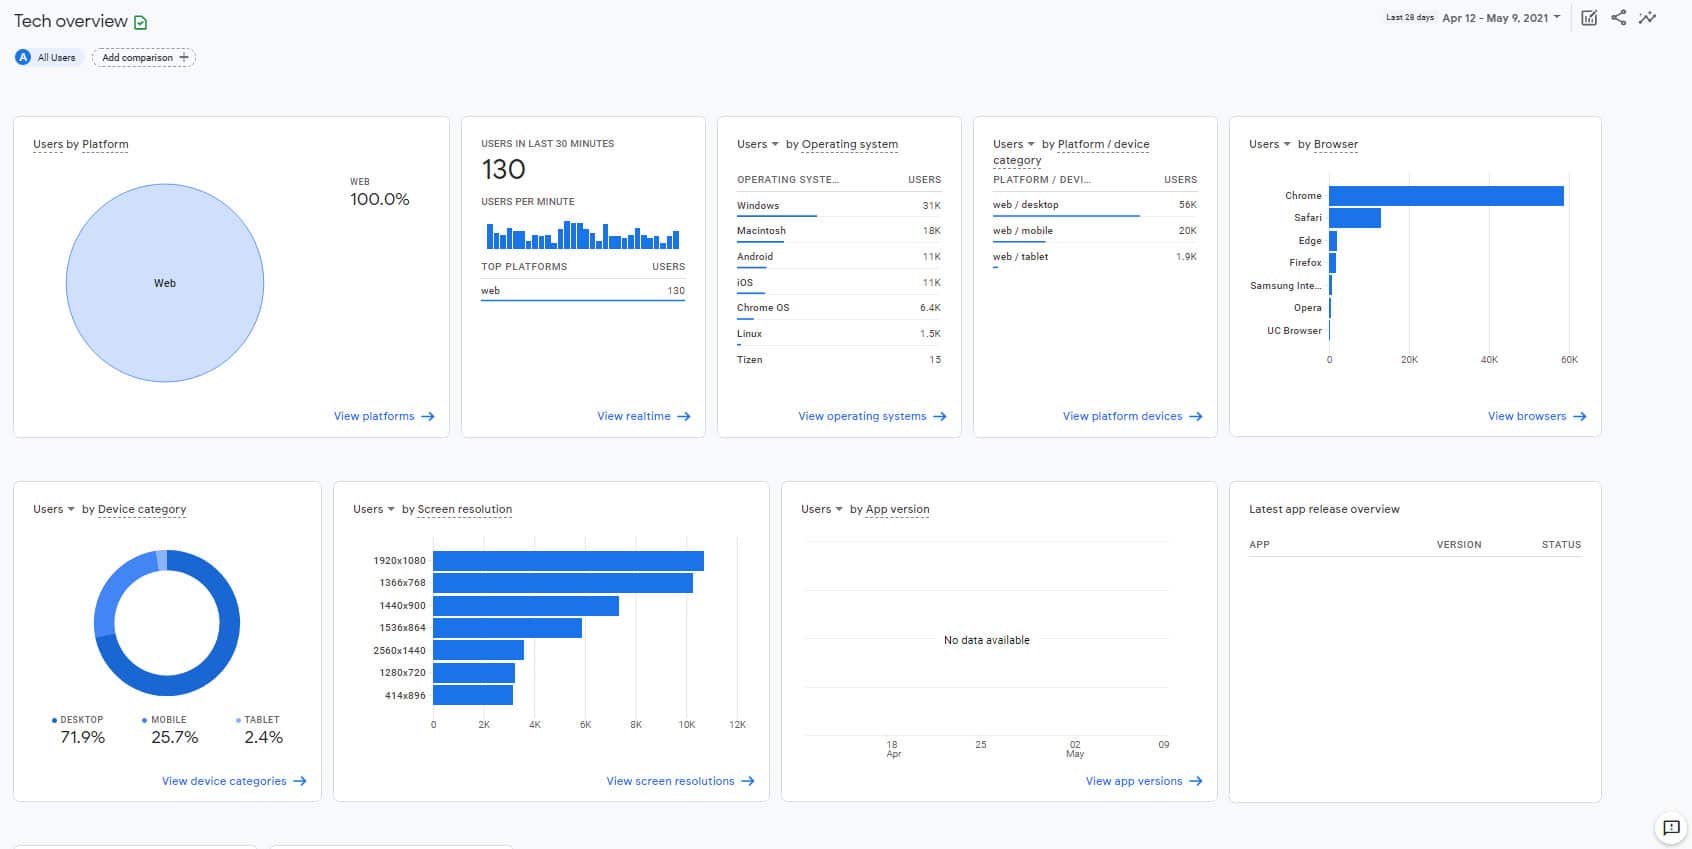 Tech Overview in Google Analytics 4